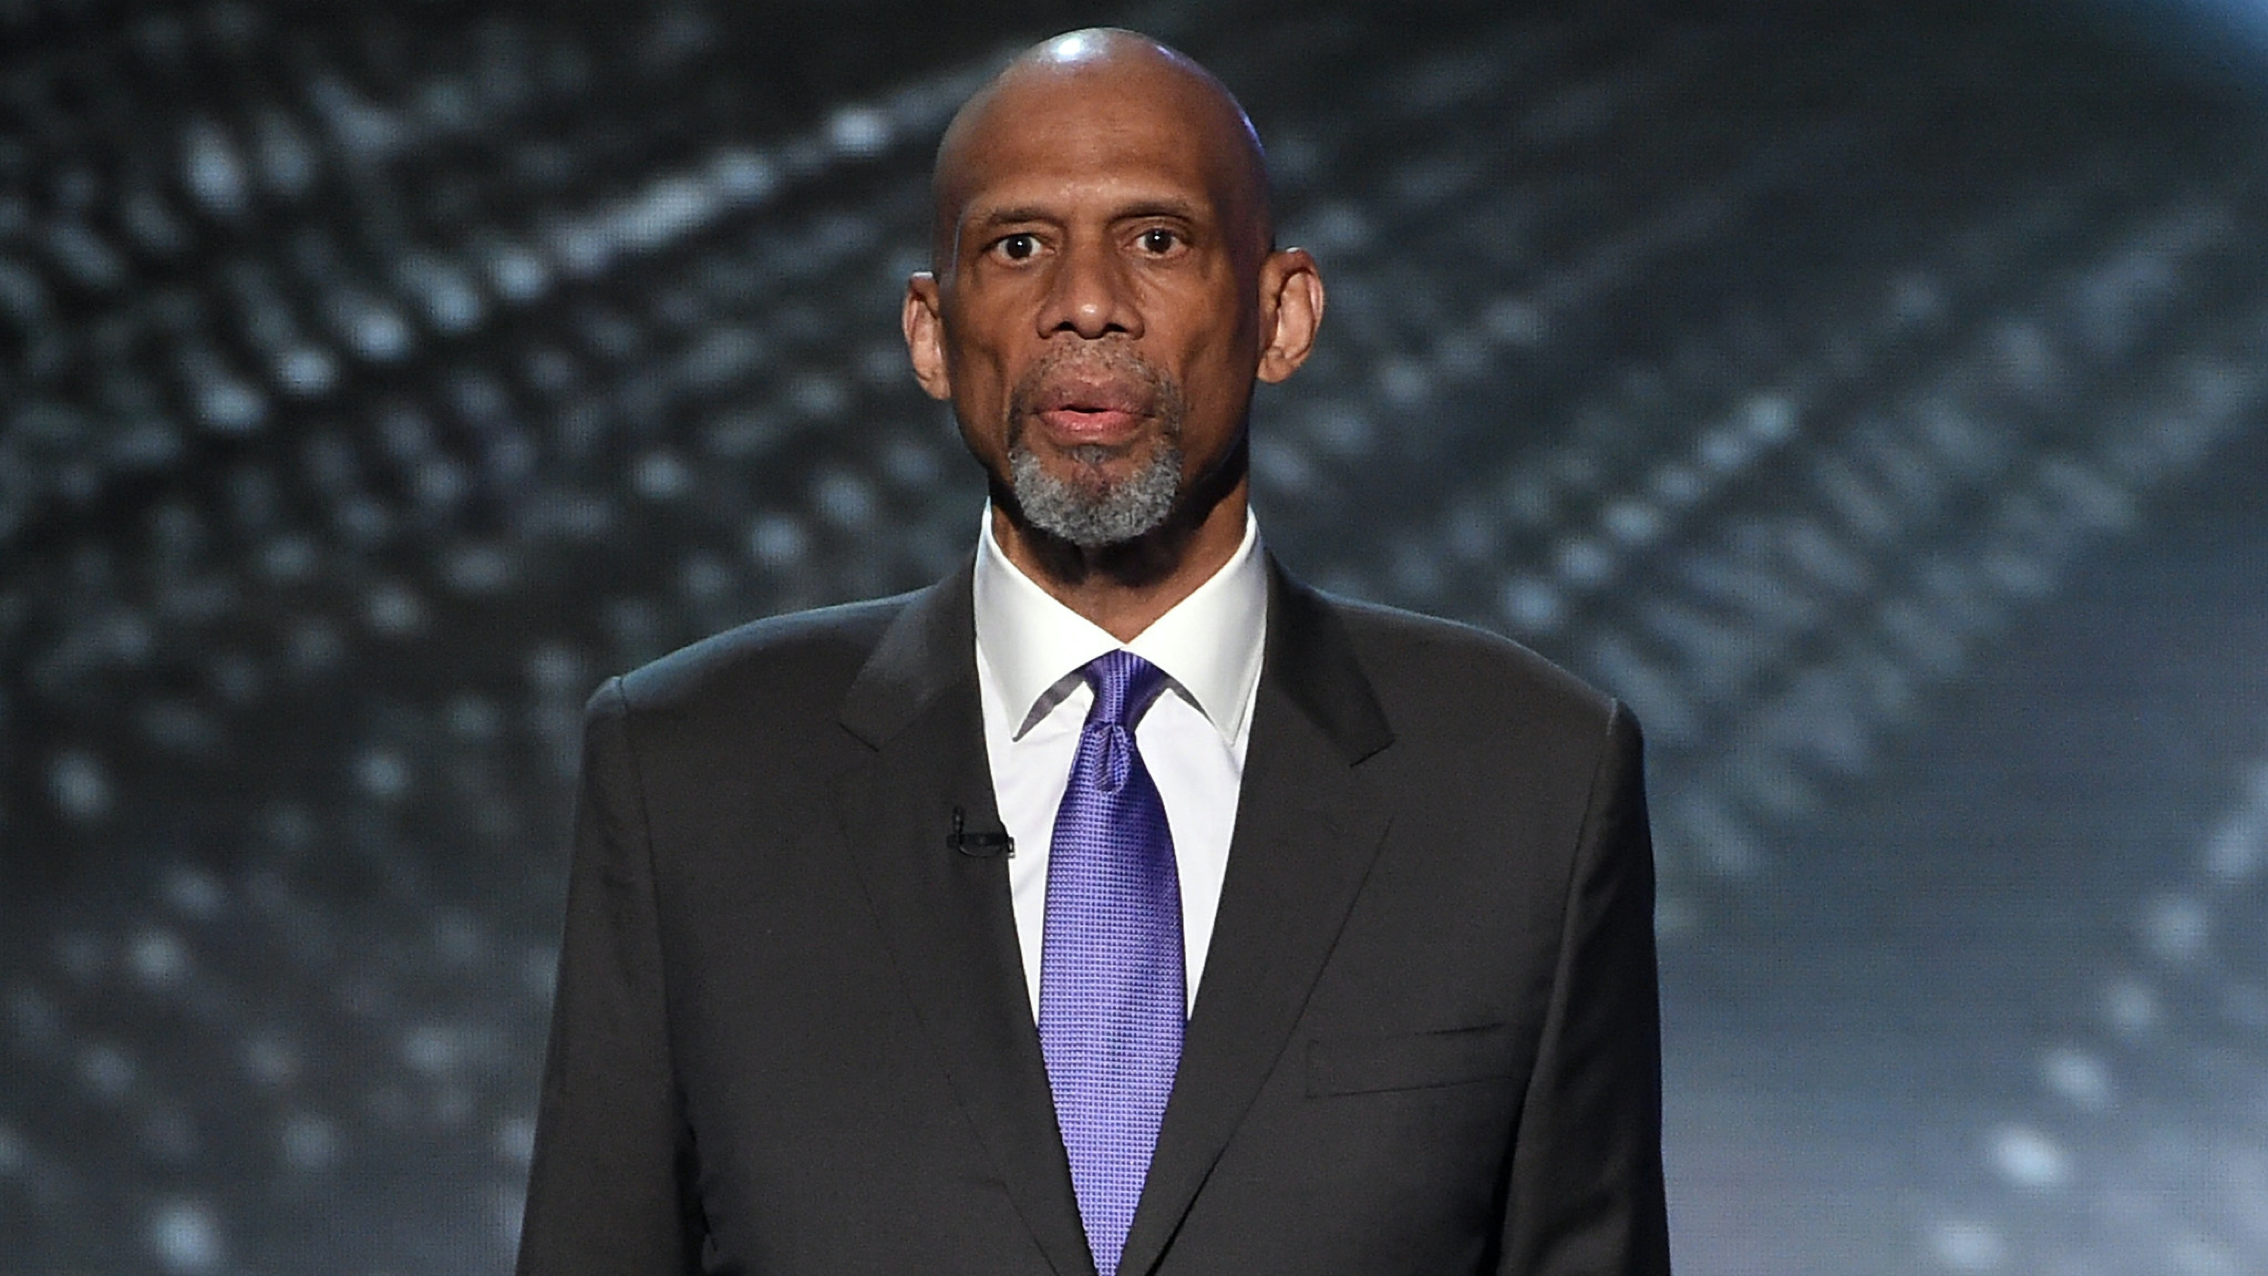 You are currently viewing Kareem Abdul-Jabbar defends protests and says racism is deadlier than Covid-19 in powerful op-ed